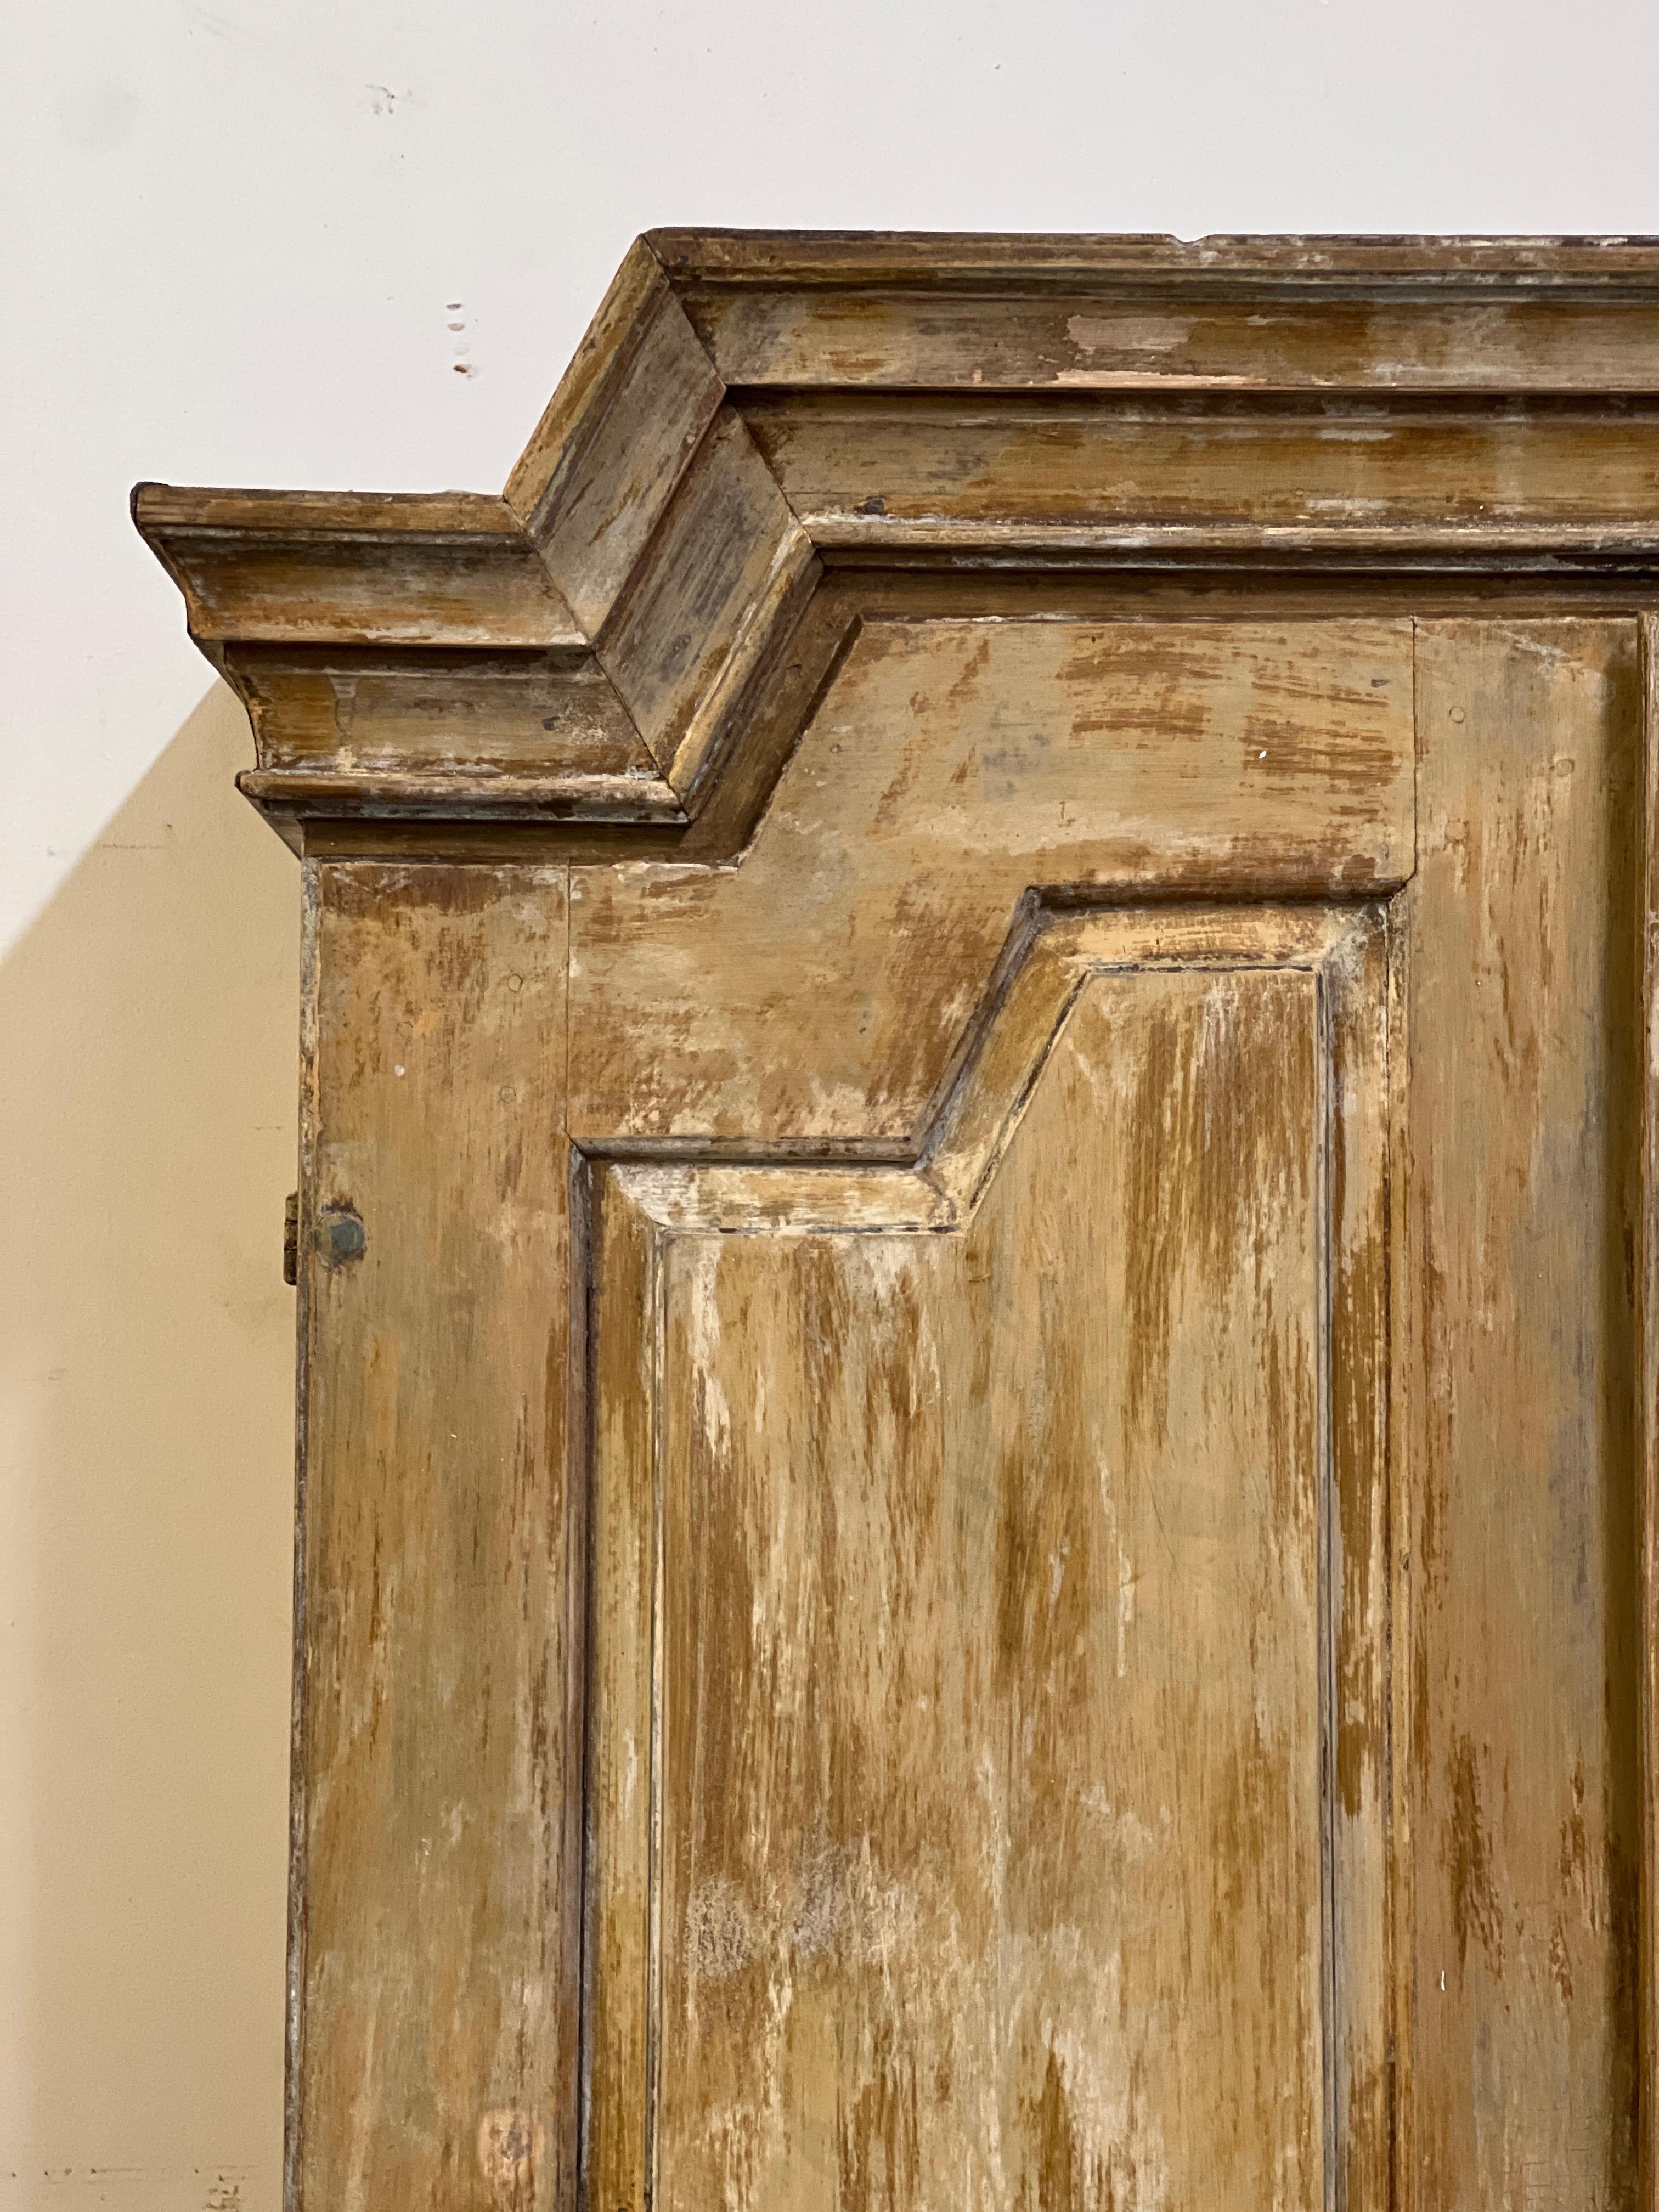 A beautiful Swedish Gustavian cabinet that has been painted and dry scrapped over its lifetime. It dissembles into two parts. This beautiful piece shows the original paint job with painted details underneath the layers and has a scalloped bottom.